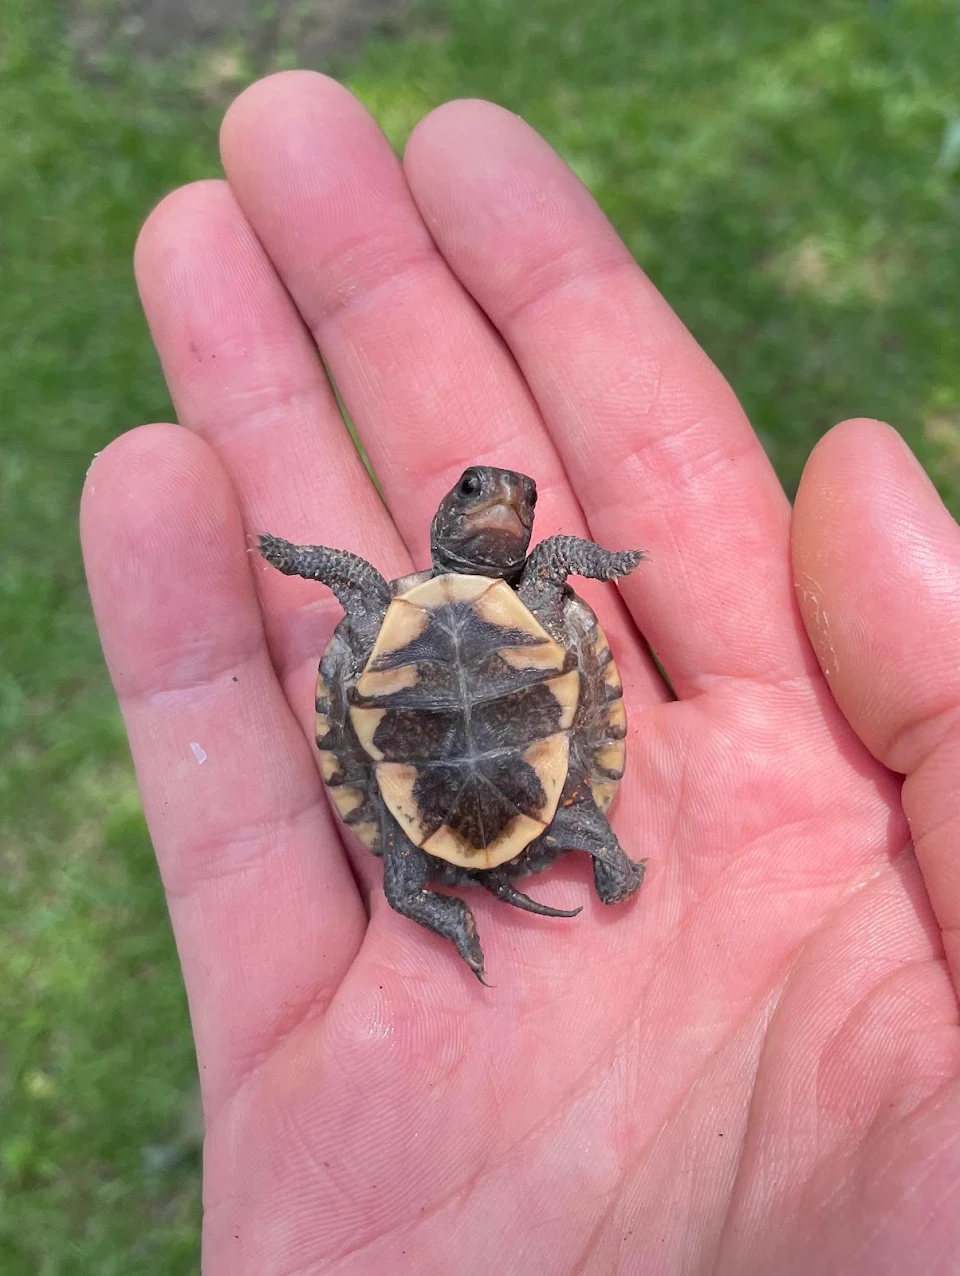 this tiny turtle upside down